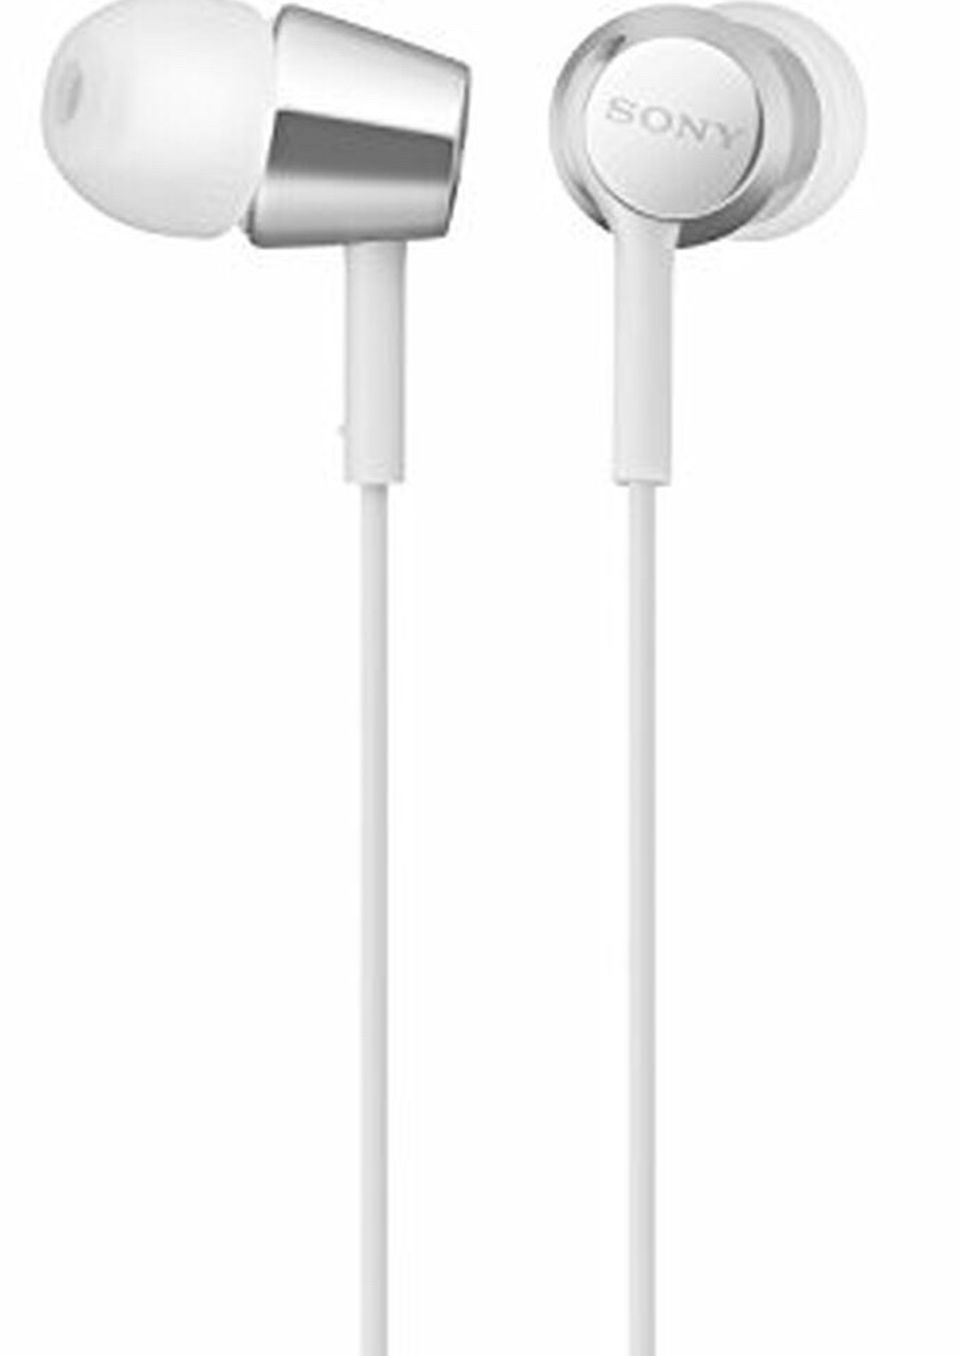 Sony Earbuds With Microphone, In-Ear Headphones And Volume Control, Built-In Mic Earphones For Smartphone Tablet Laptop 3.5mm Audio Plug Devices, Whit